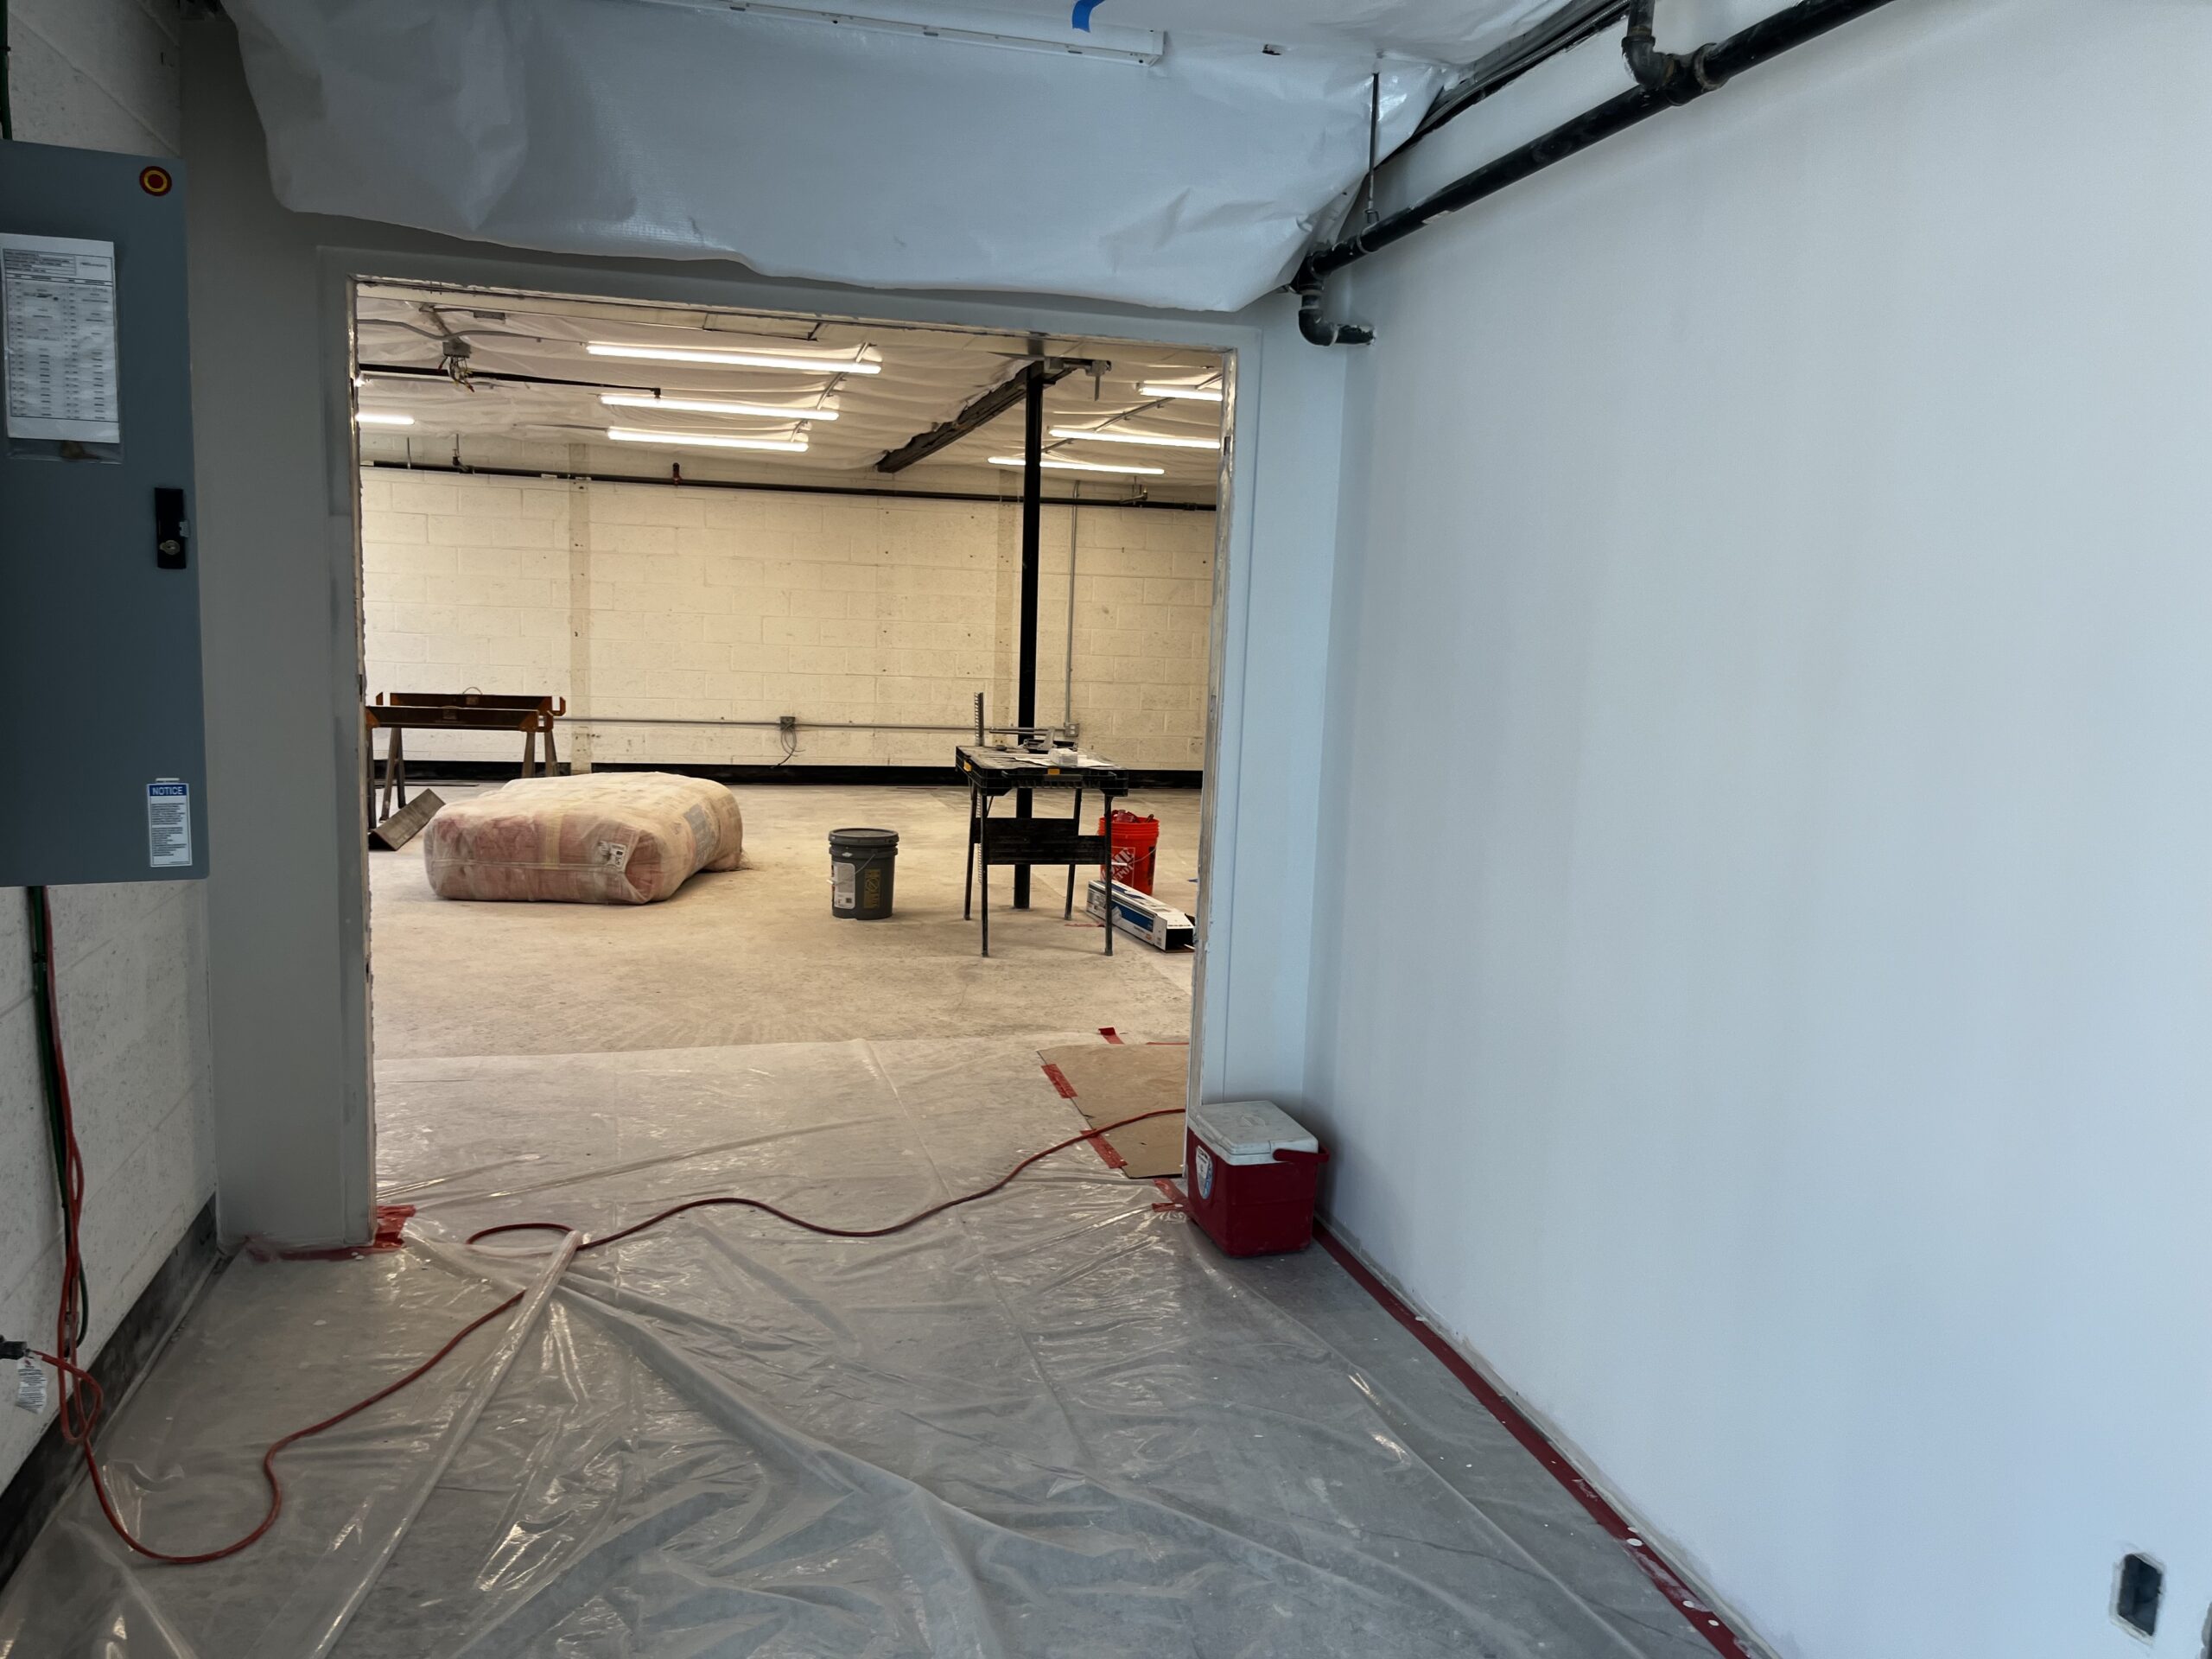 Rehearsal rooms under construction